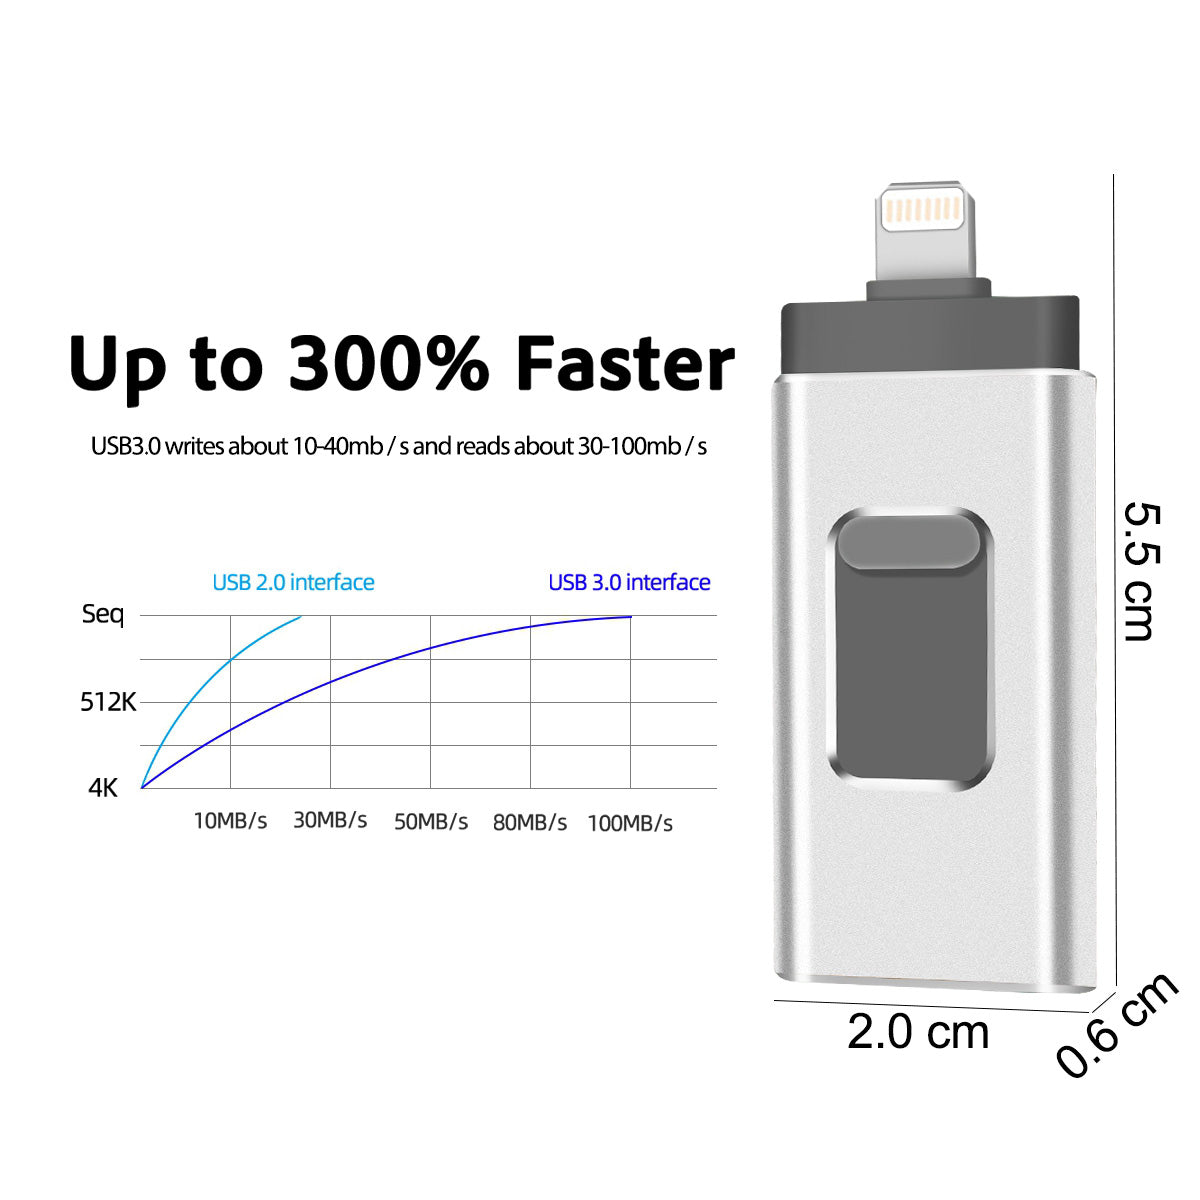 RICHWELL R-01B 16GB 3 in 1 Photo Stick for iPhone Android PC, Plug and Play USB 3.0 Flash Drive Memory Stick - Silver